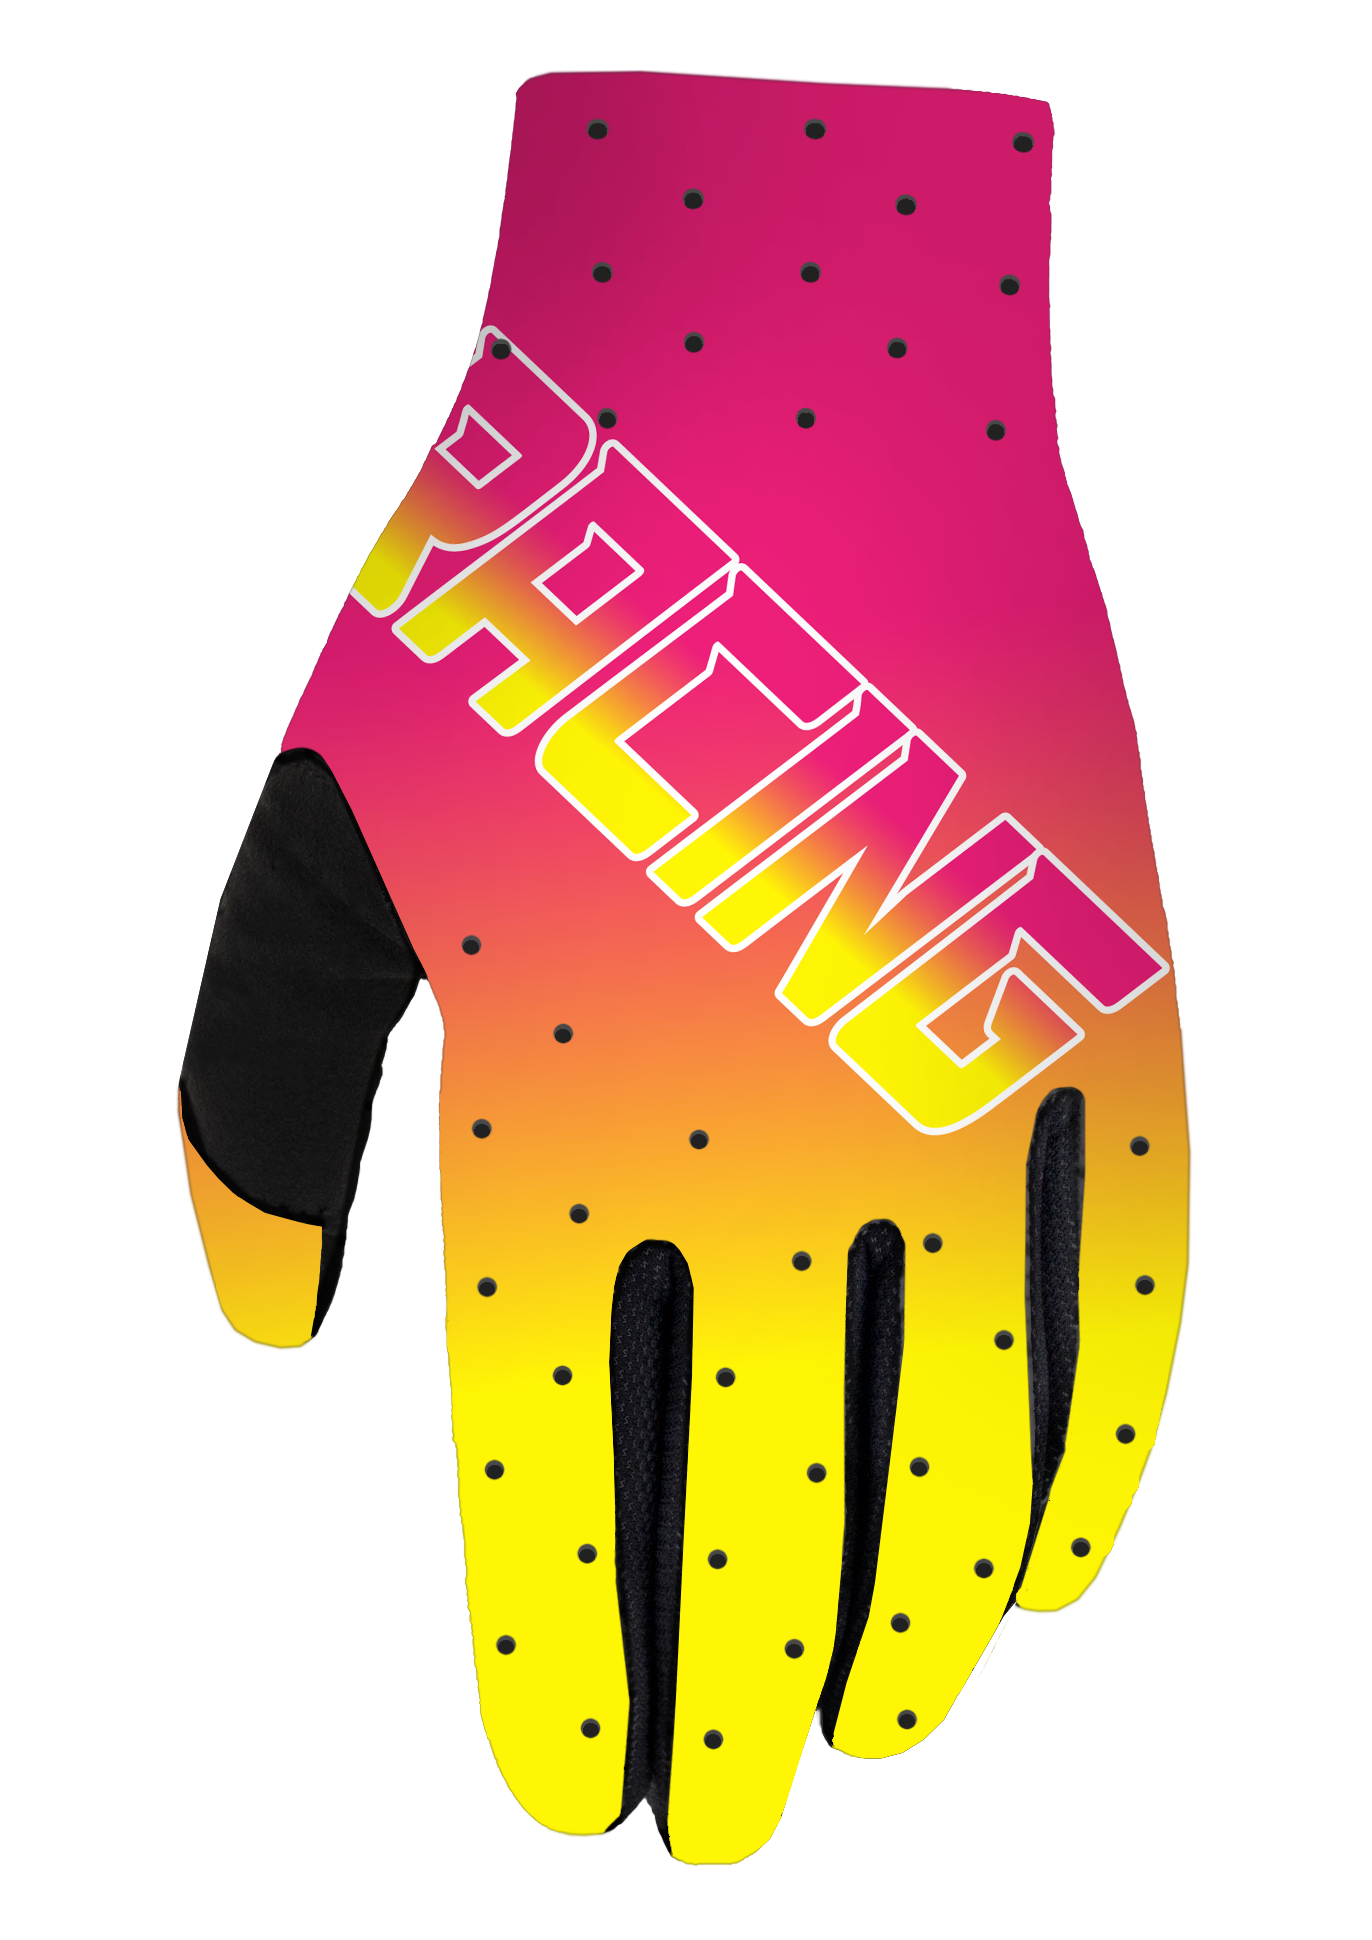 110 RACING // LE23 ICONIC YOUTH GLOVE - PINK